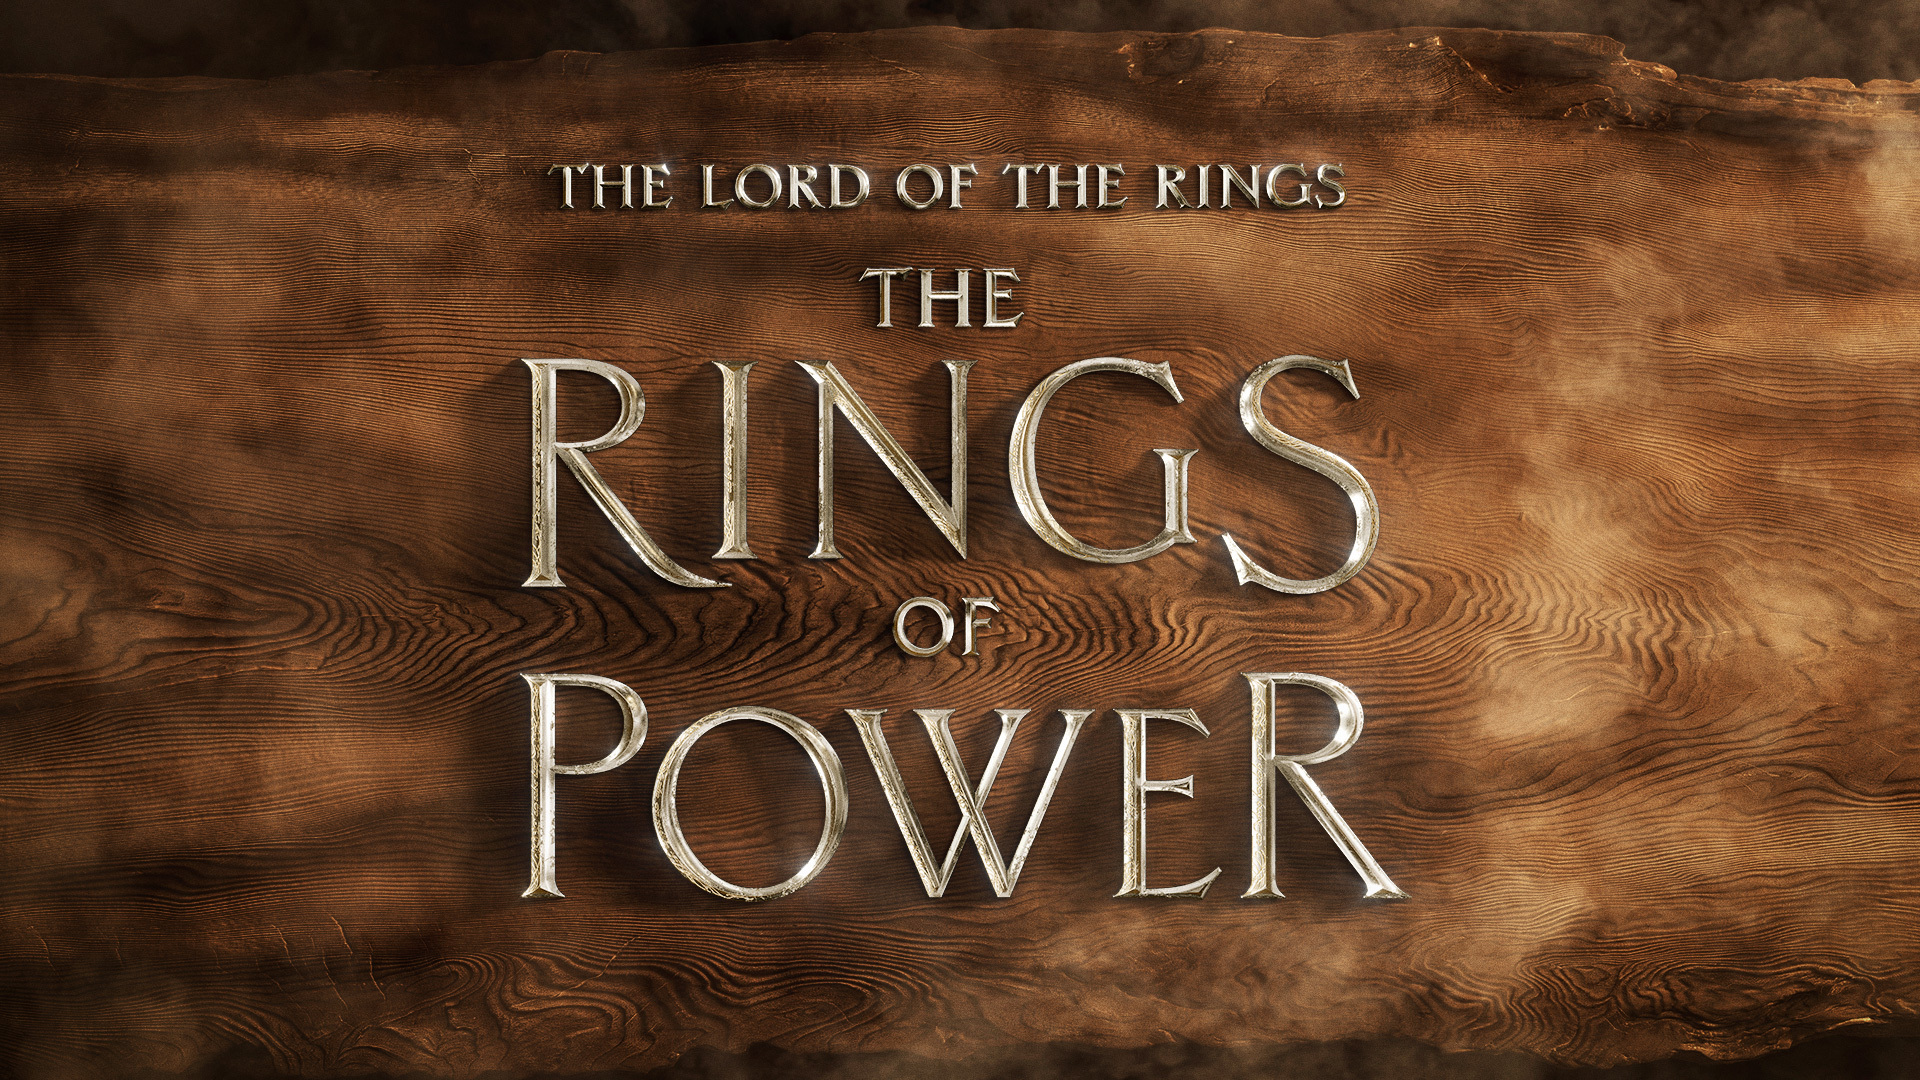 The ‘Lord of the Rings’ logo.